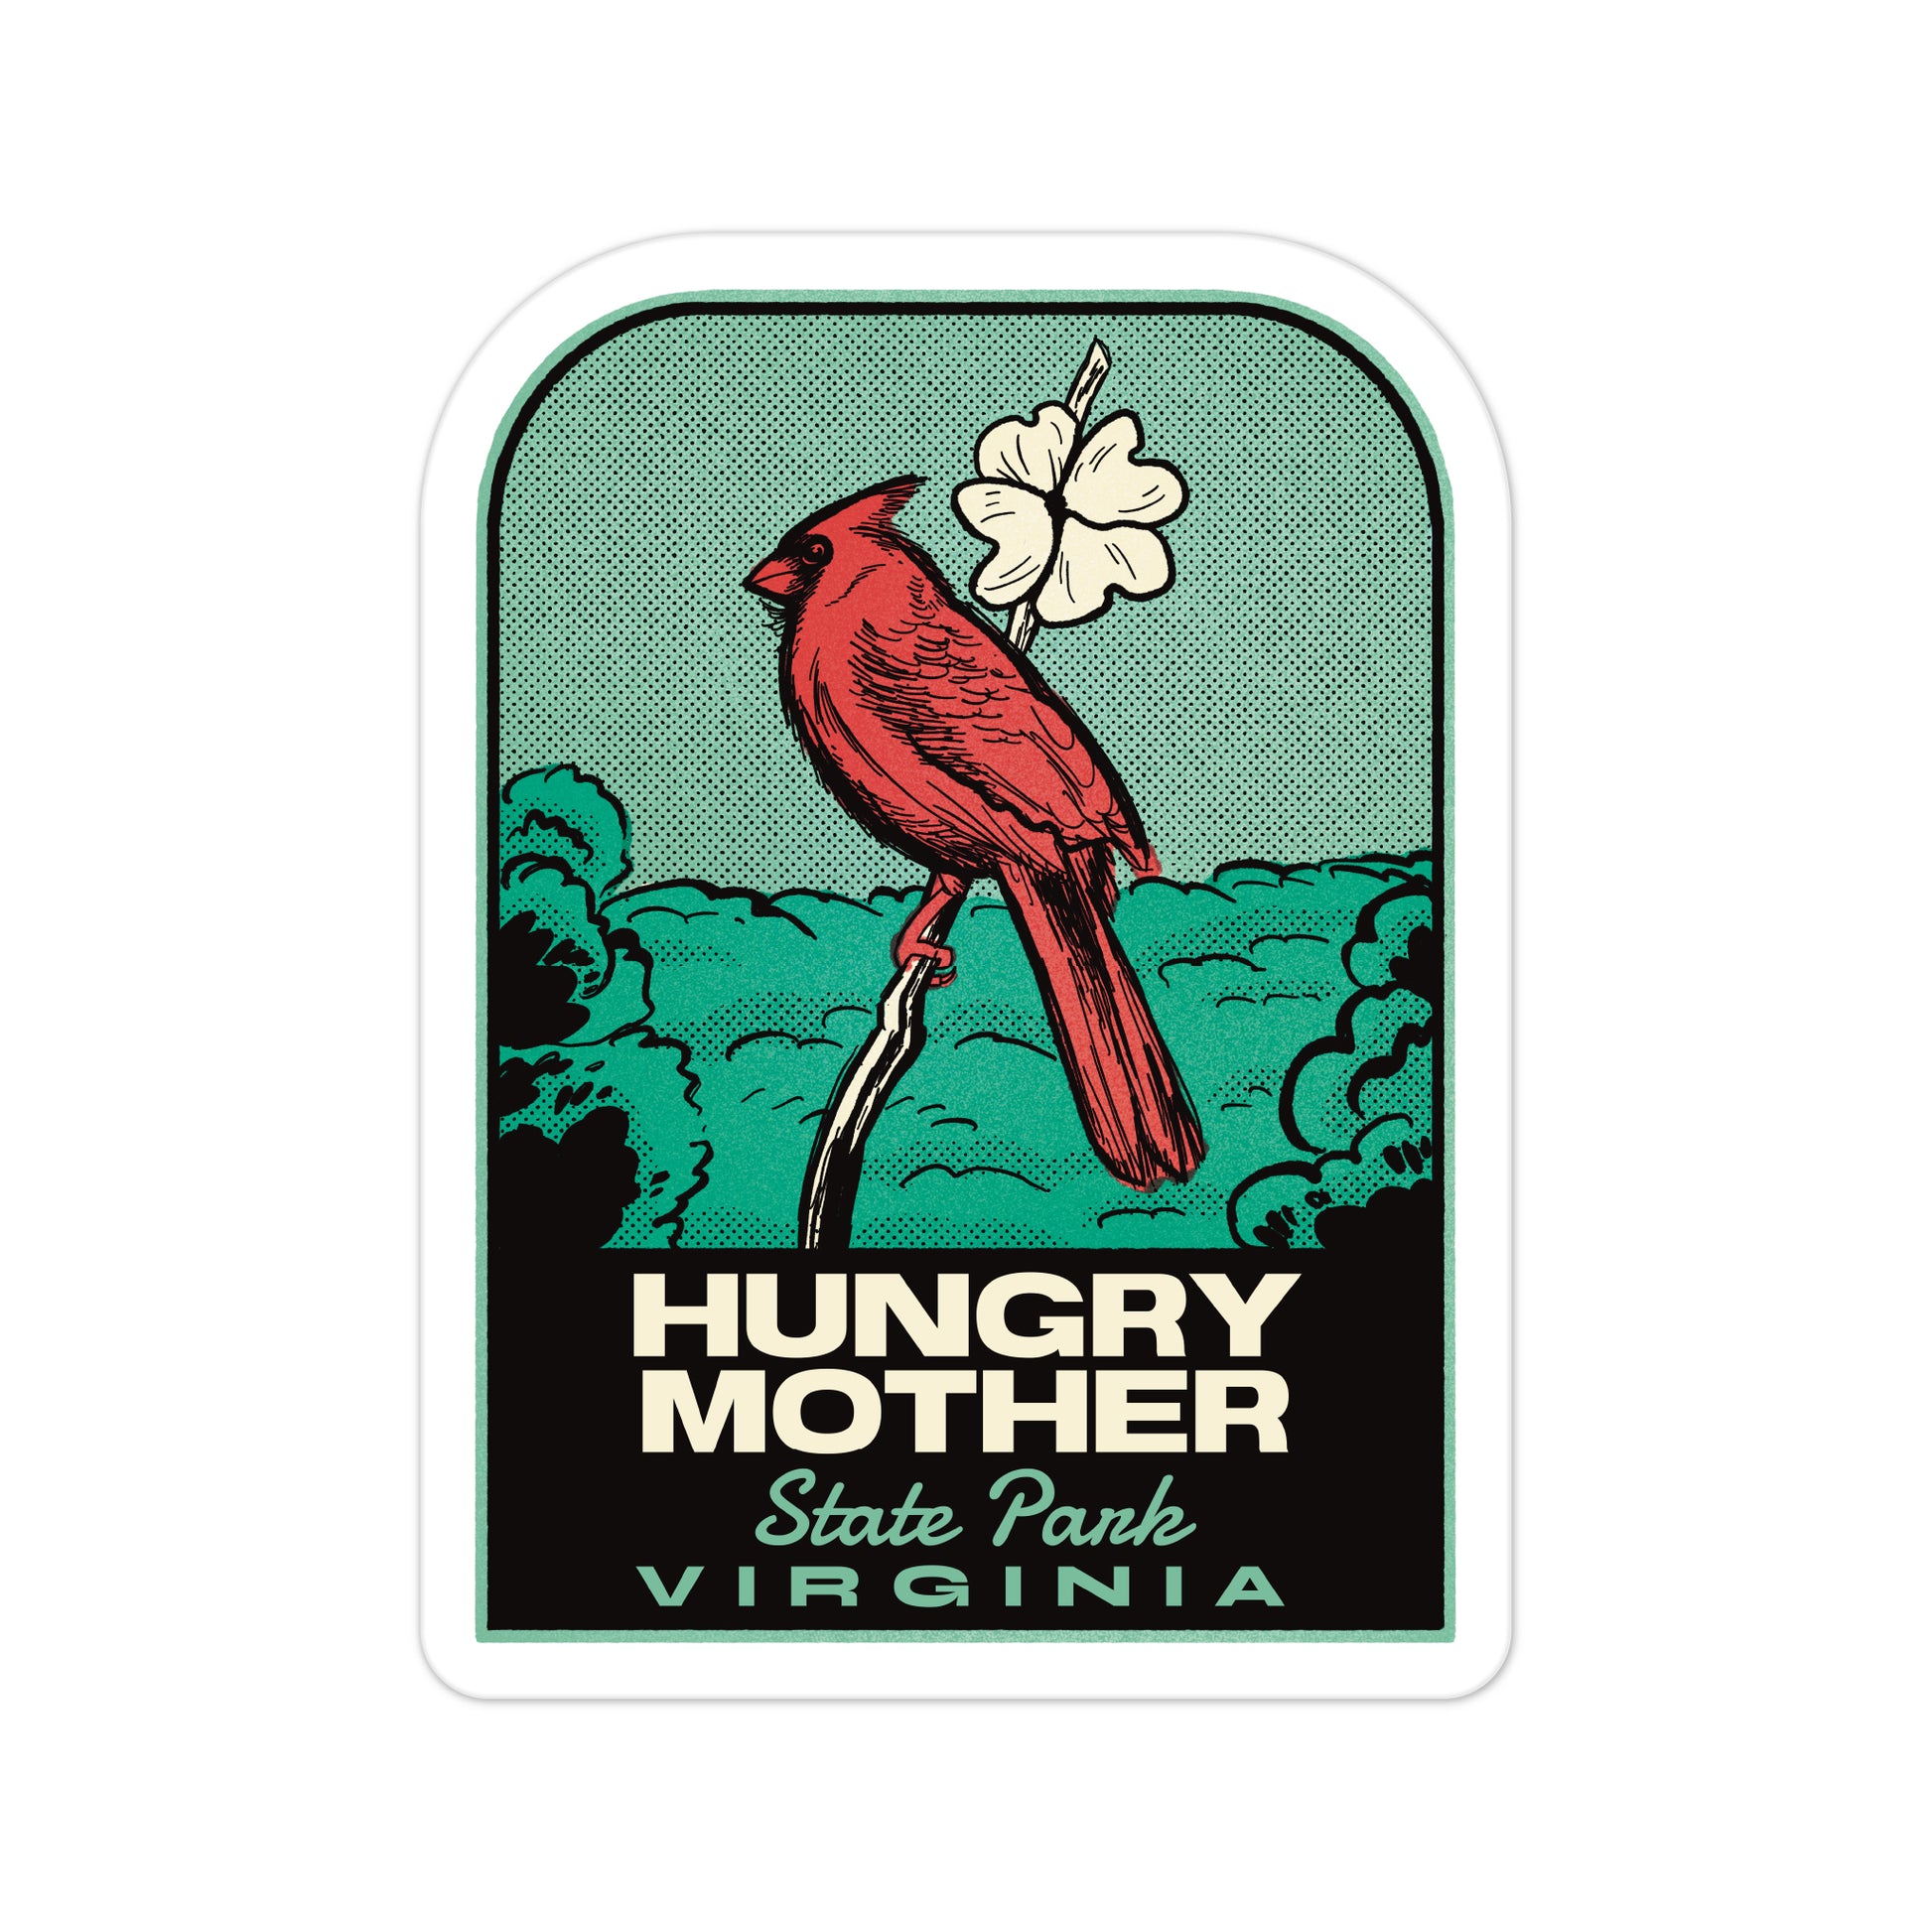 A sticker of Hungry Mother State Park